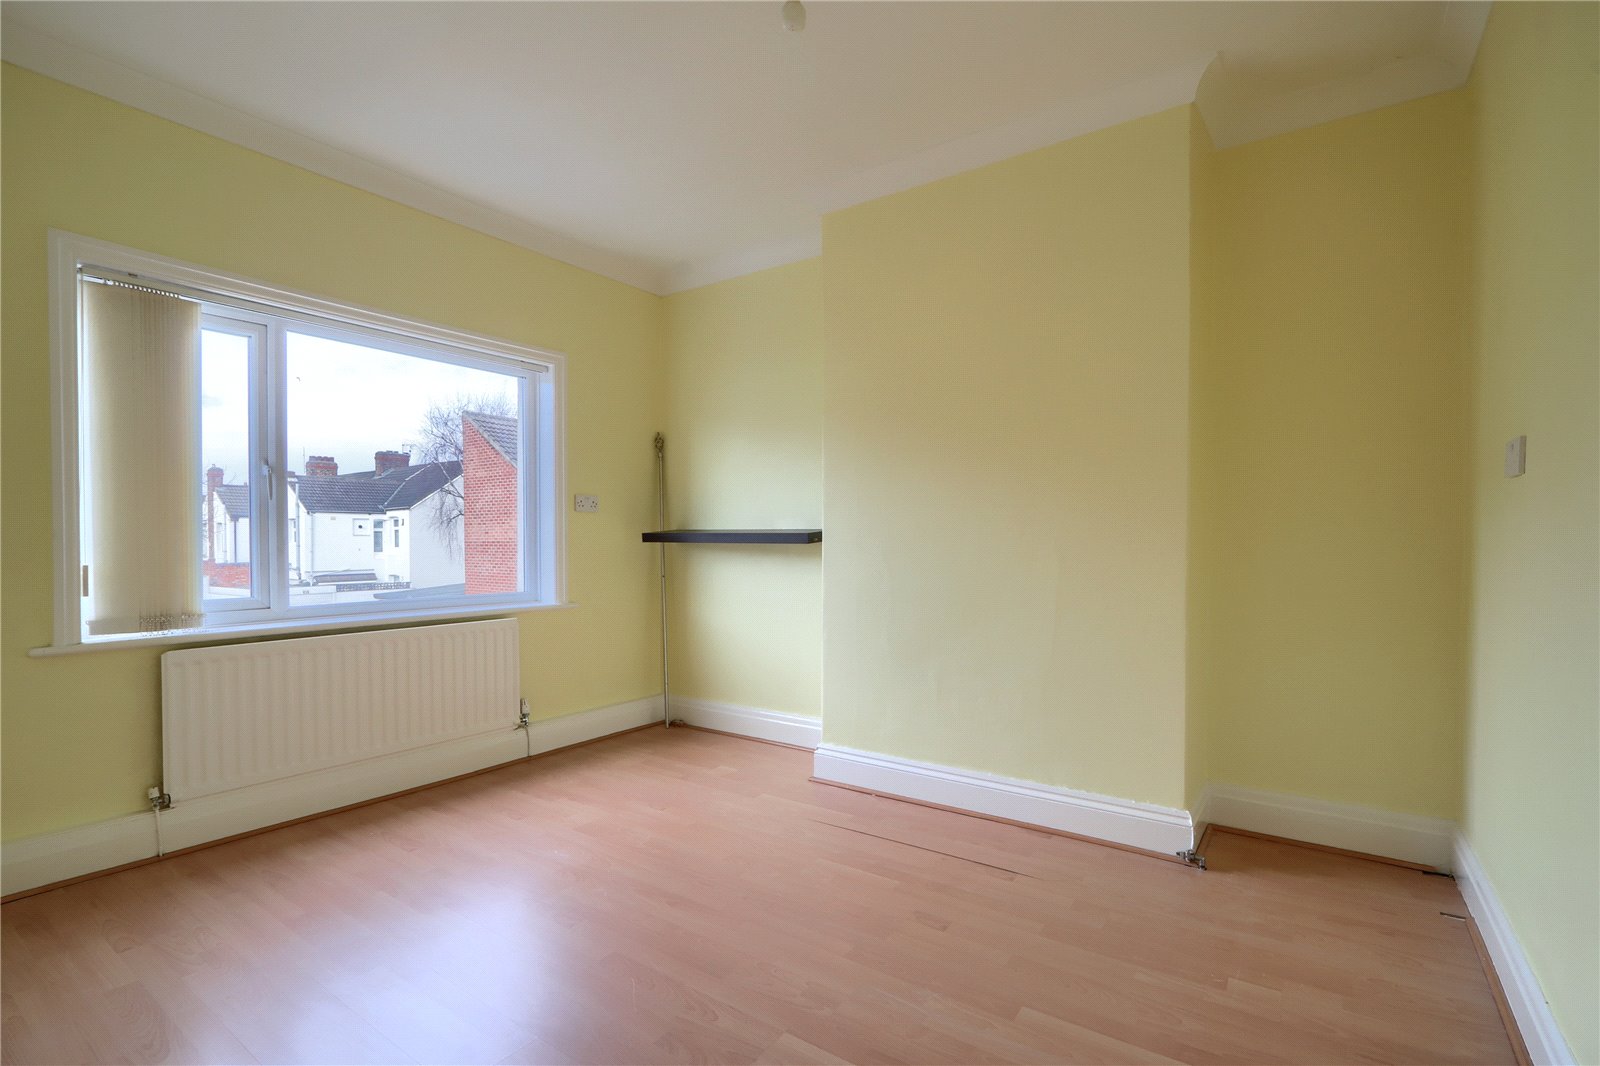 3 bed house for sale in Richardson Road, Stockton-on-Tees  - Property Image 7